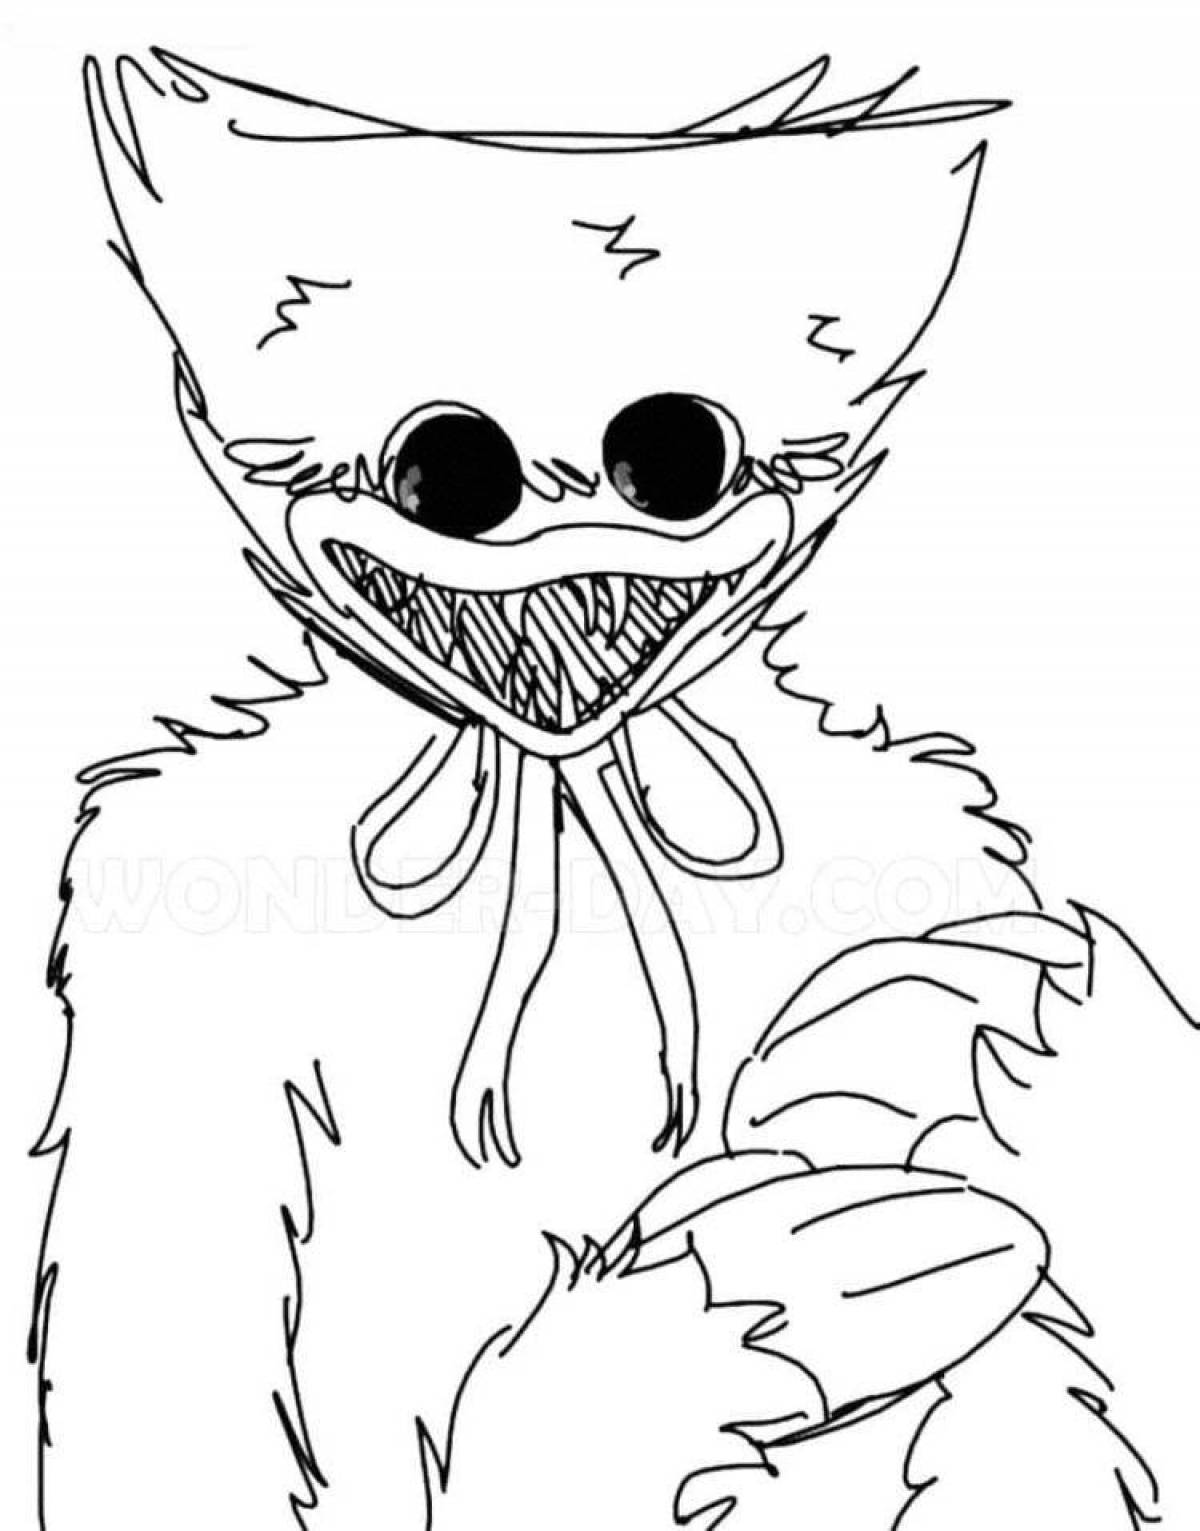 Kili Willy's adorable coloring page